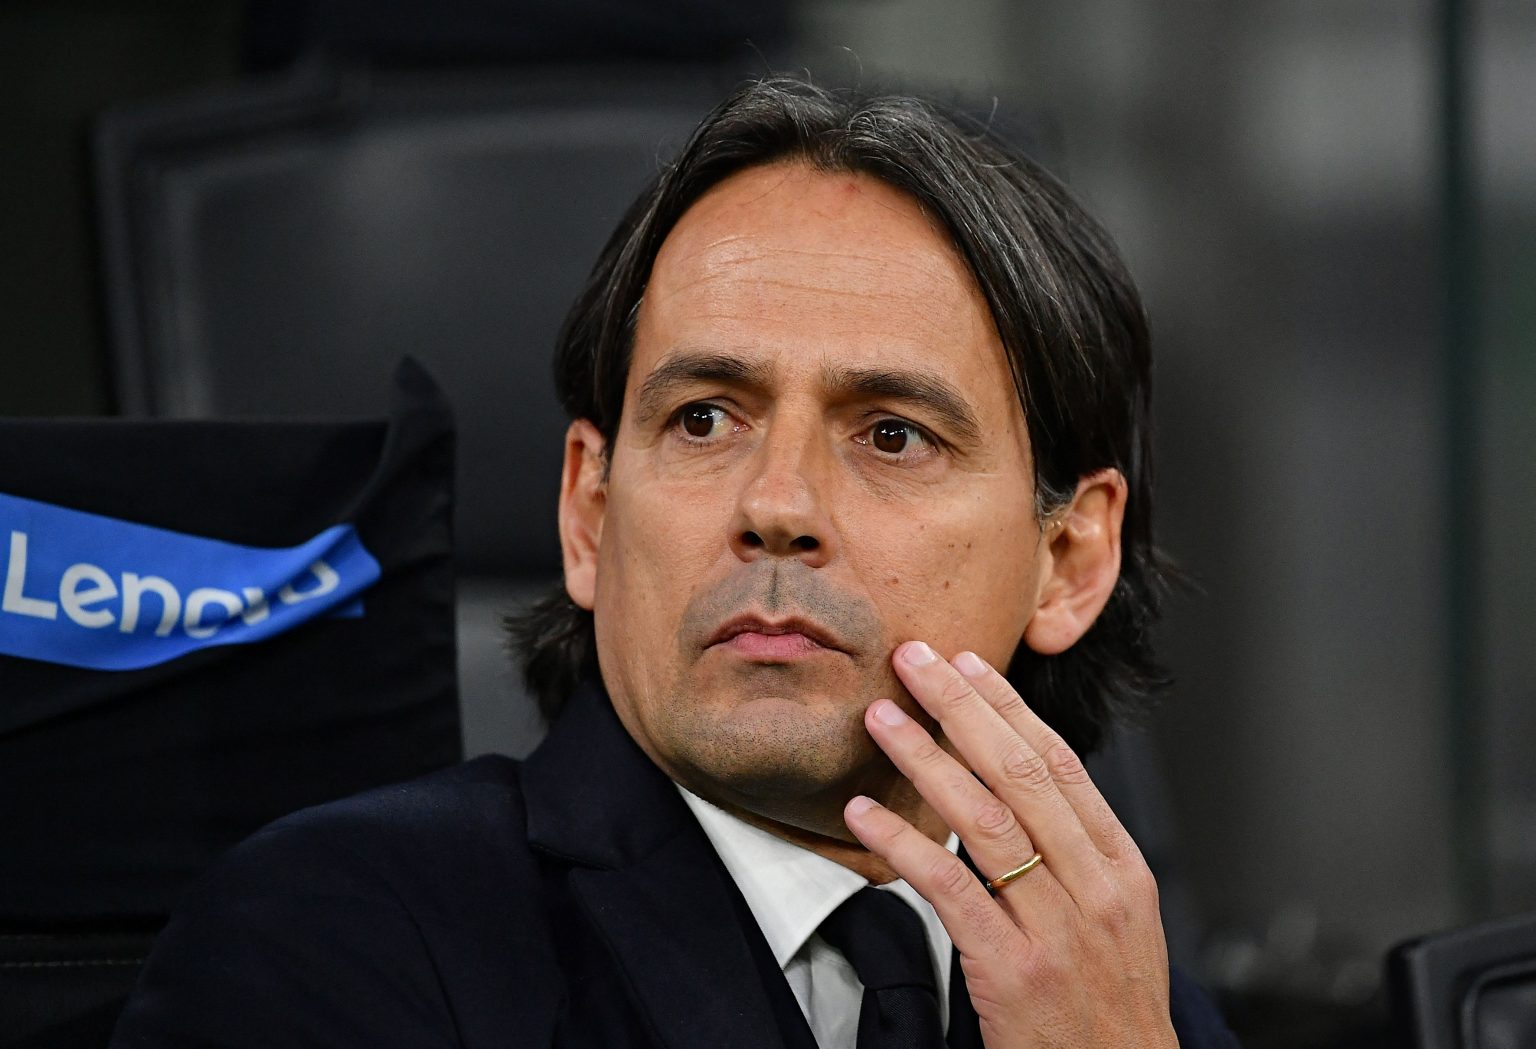  Simone Inzaghi, coach of FC Internazionale, looking thoughtful during a match.